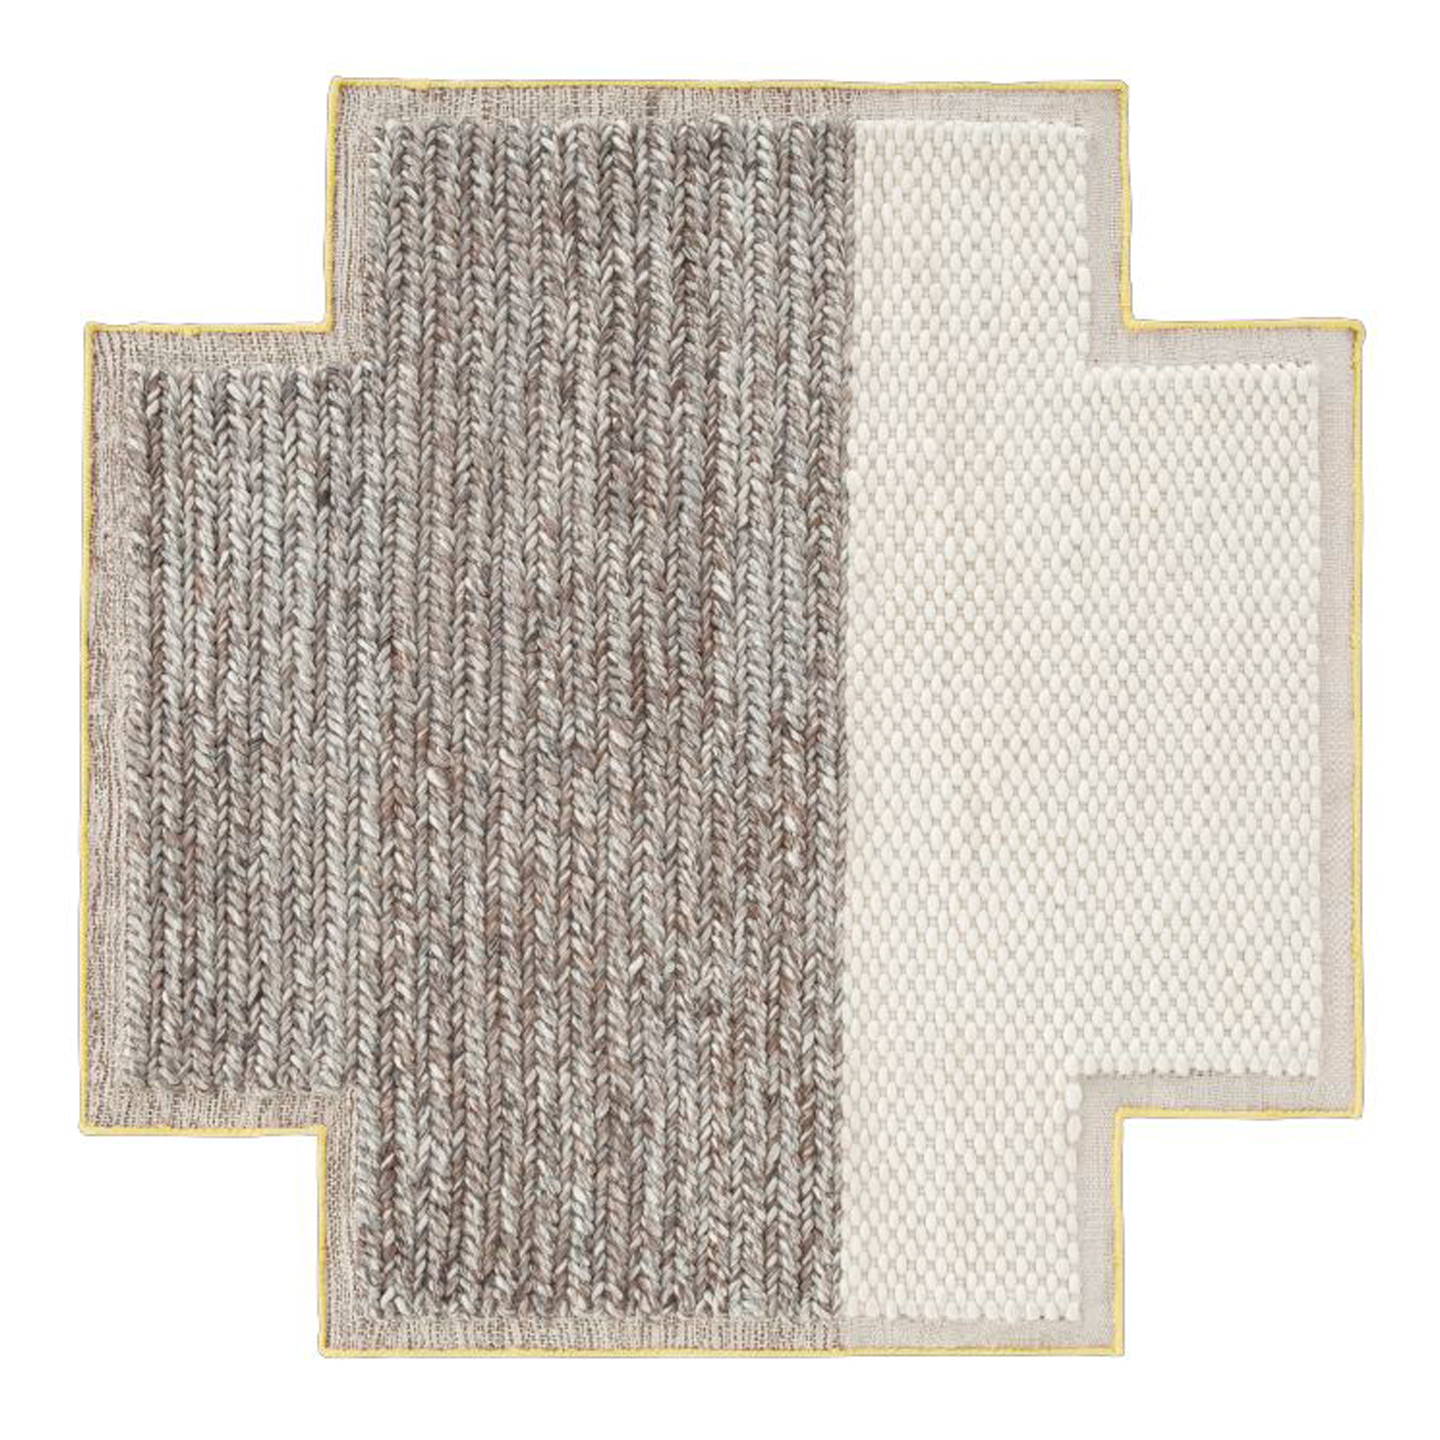 Haworth Mangas Space Rug in grey and white